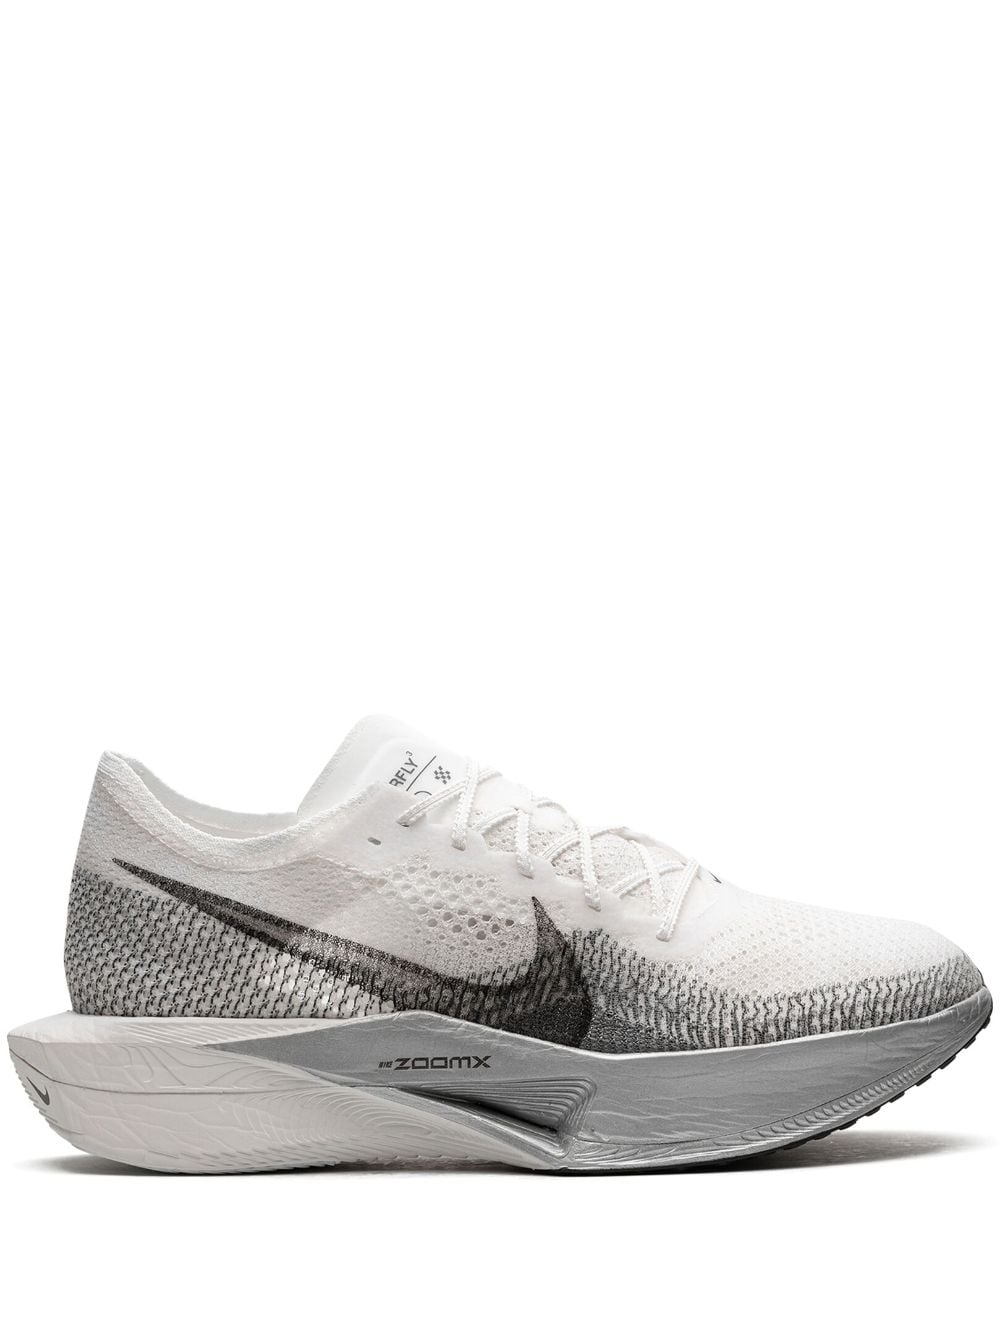 Shop Nike Zoomx Vaporfly Next% 3 "white Particle Grey" Sneakers